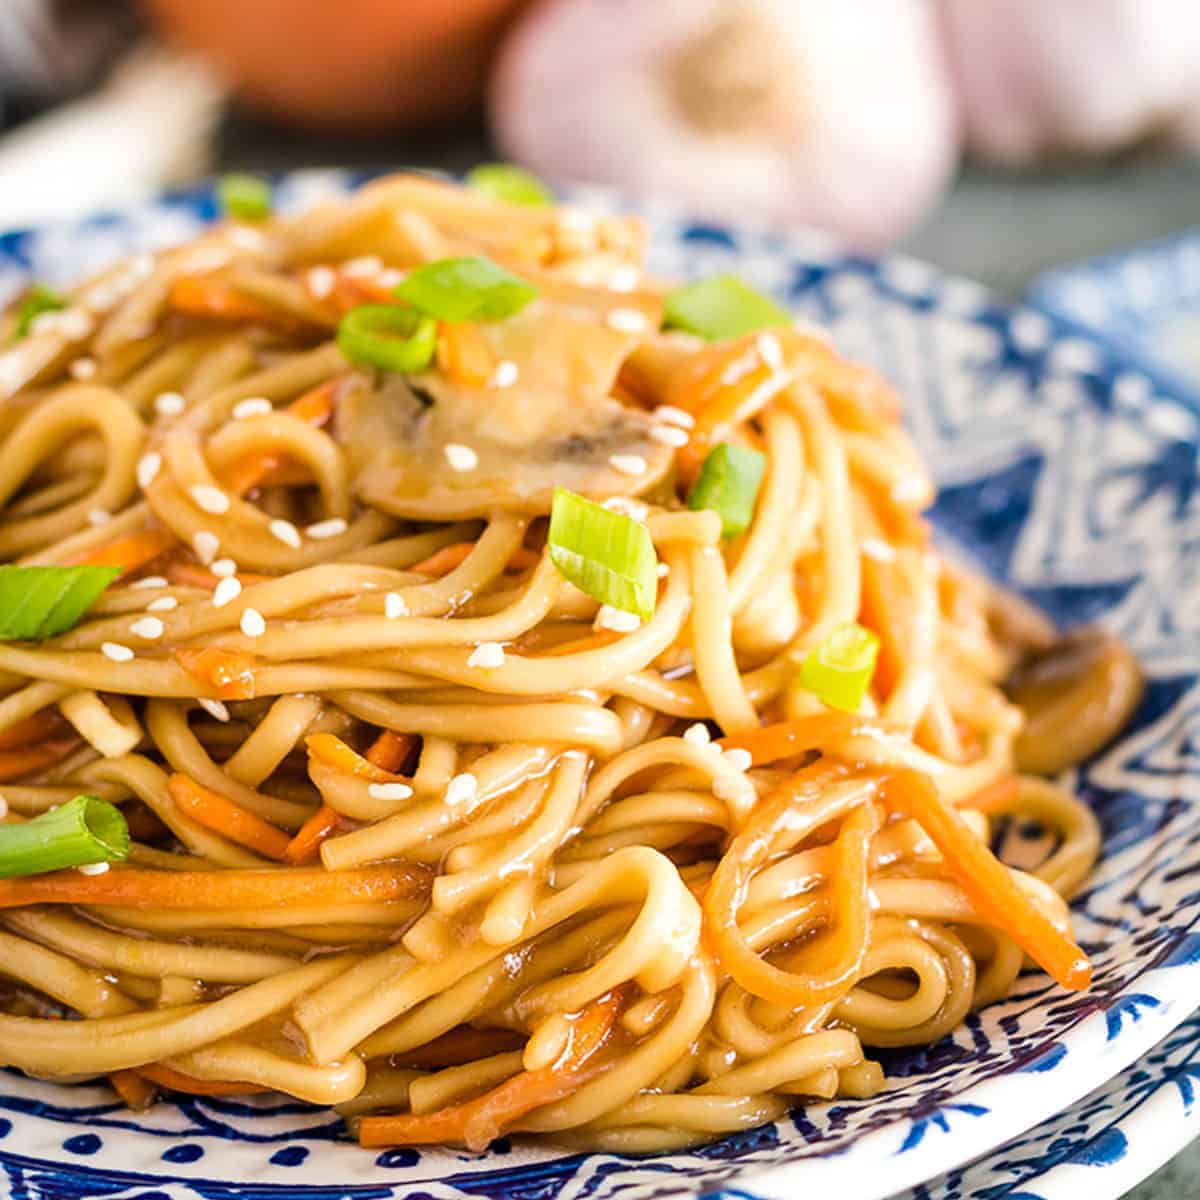 A serving of Instant Pot vegetable lo mein on a plate.